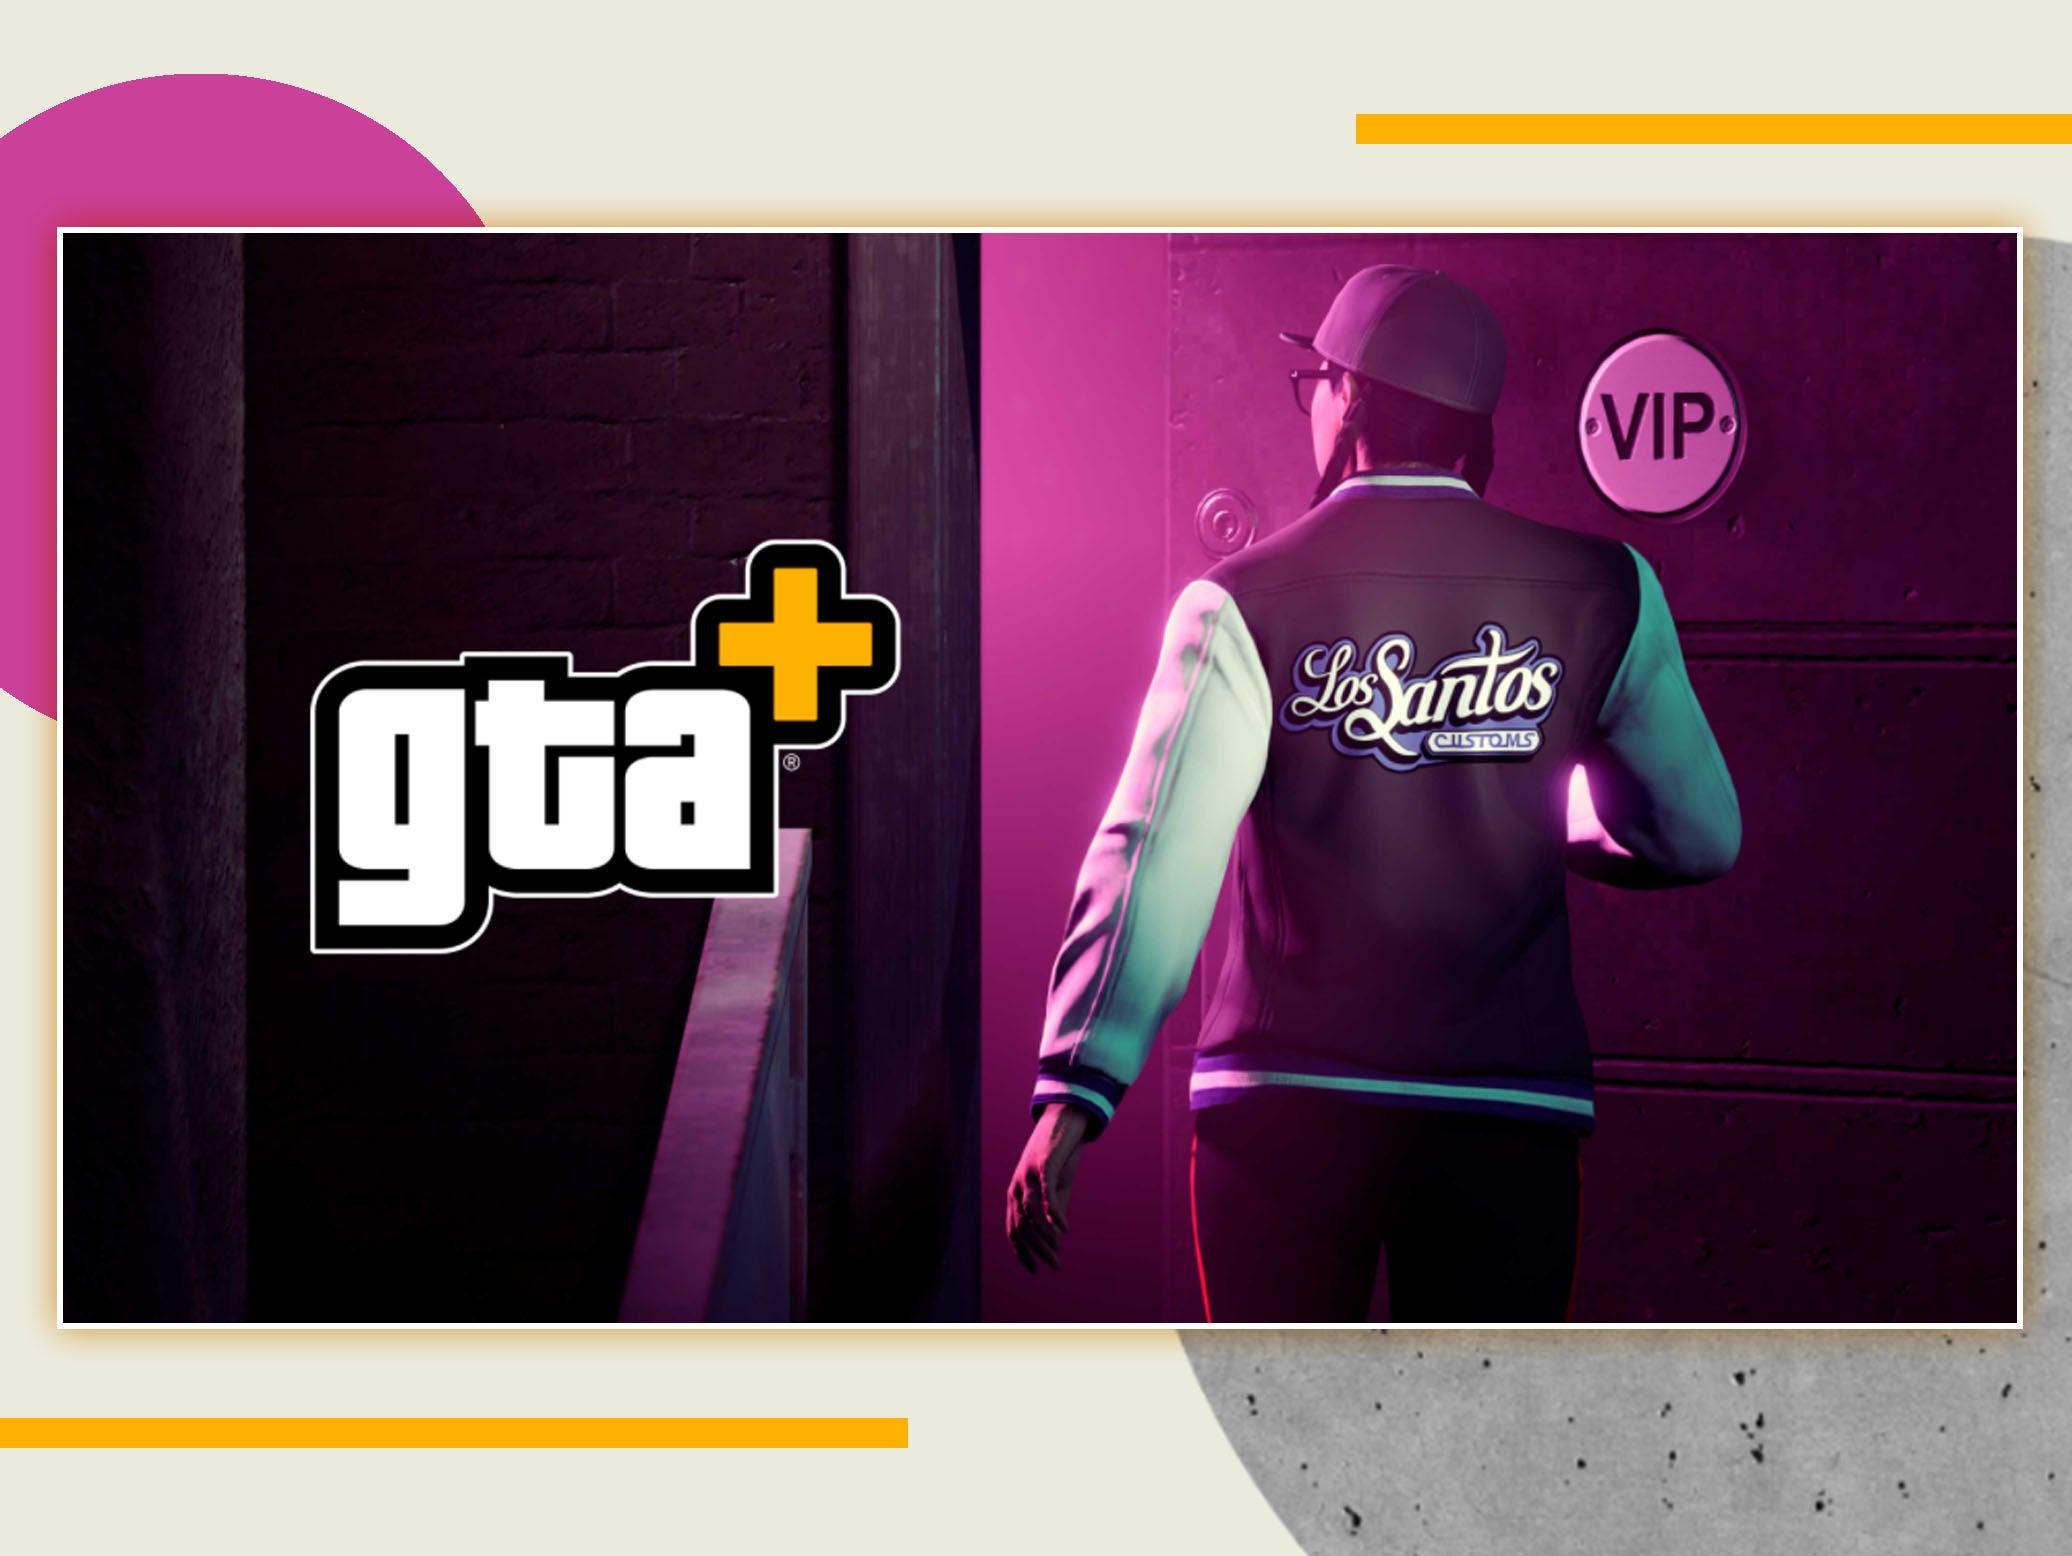 For a monthly fee, Rockstar fans can get access to exclusive content